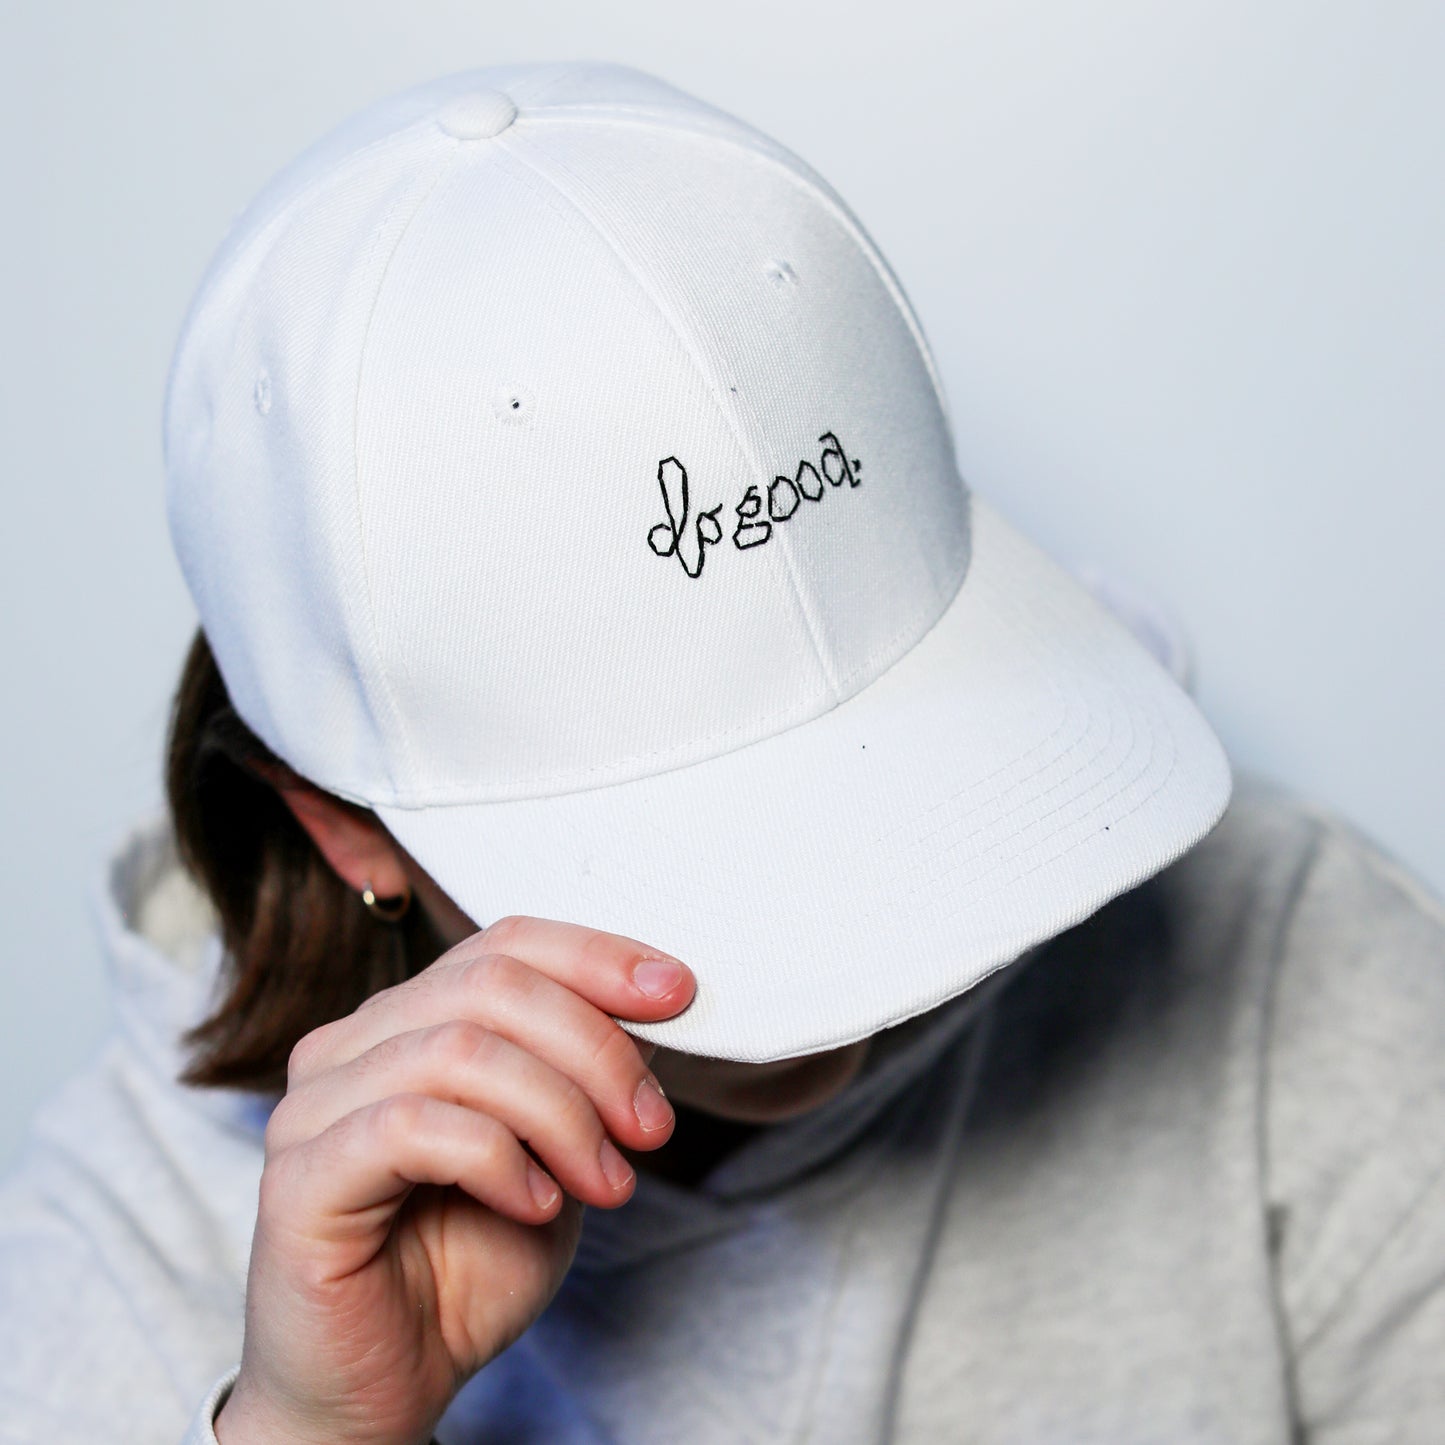 white baseball cap with hand-embroidered do good